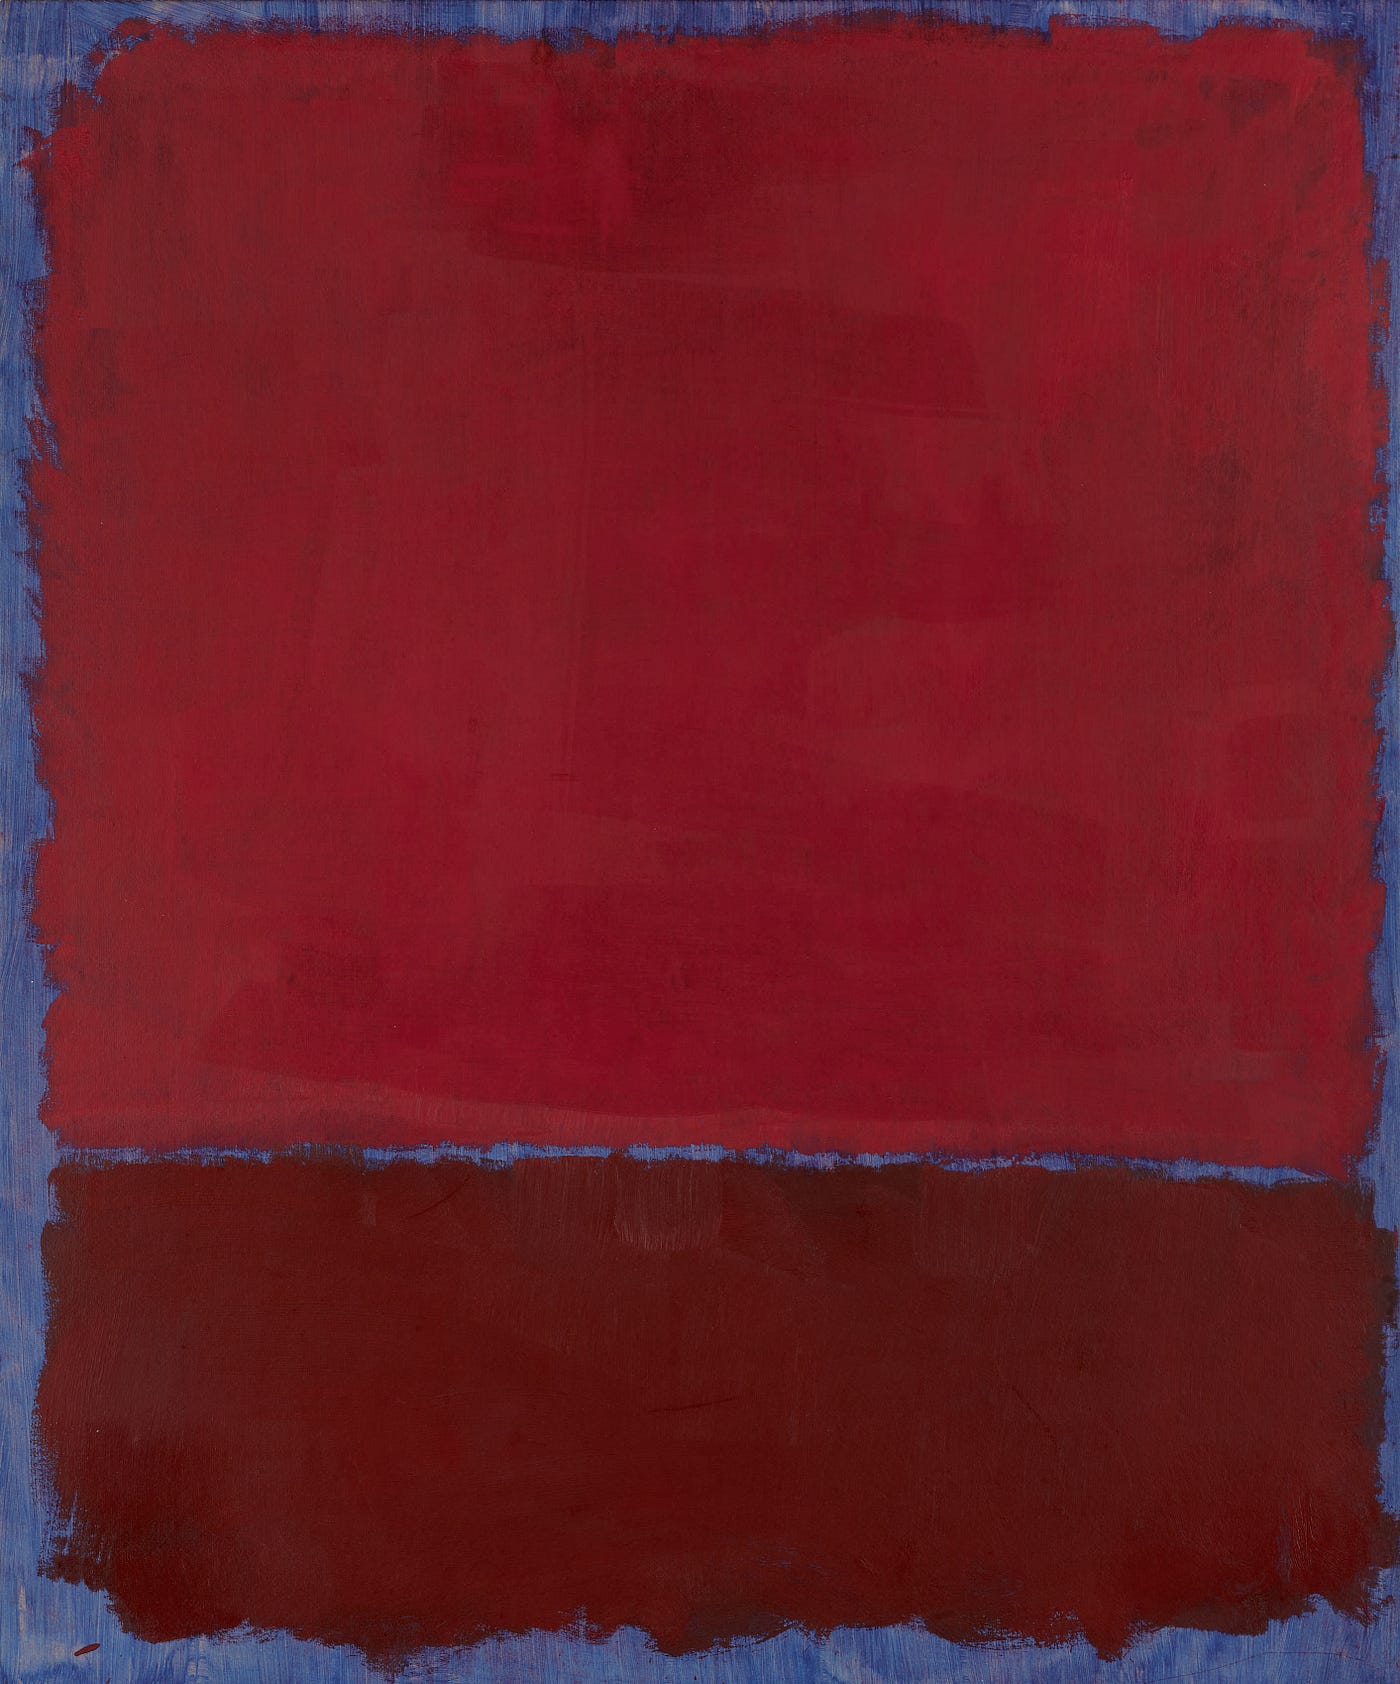 Rothko: Every Picture tells A Story